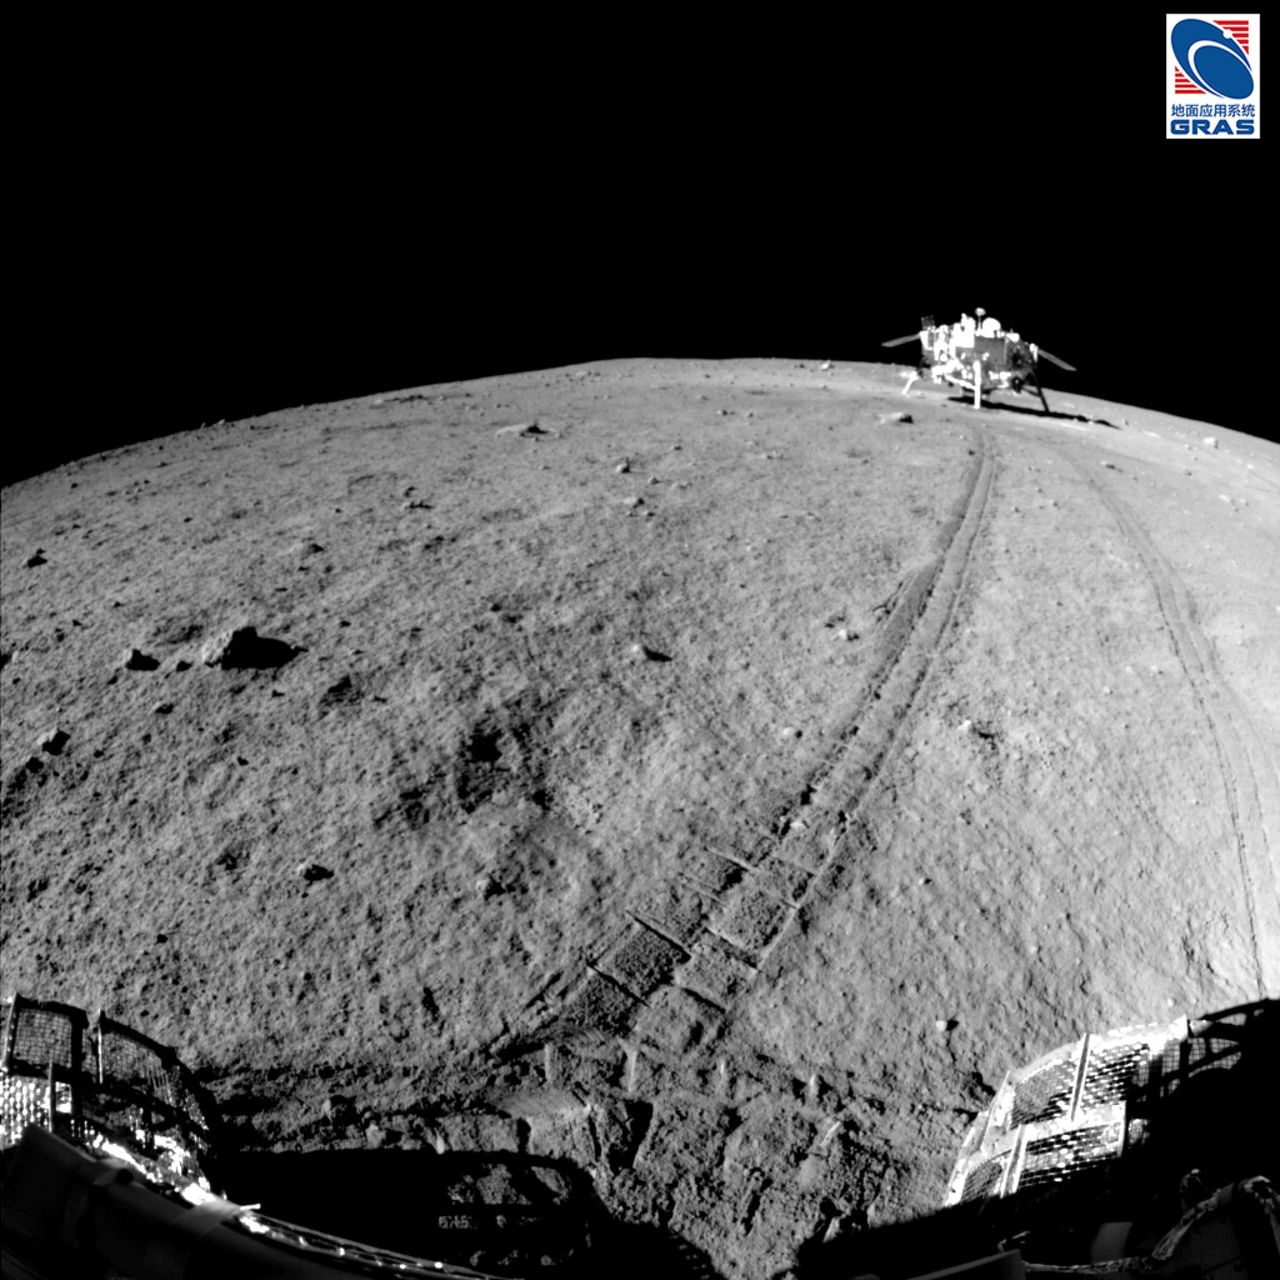 The tracks of the Jade Rabbit lunar rover, with the Chang'e 3 spacecraft in the background. 